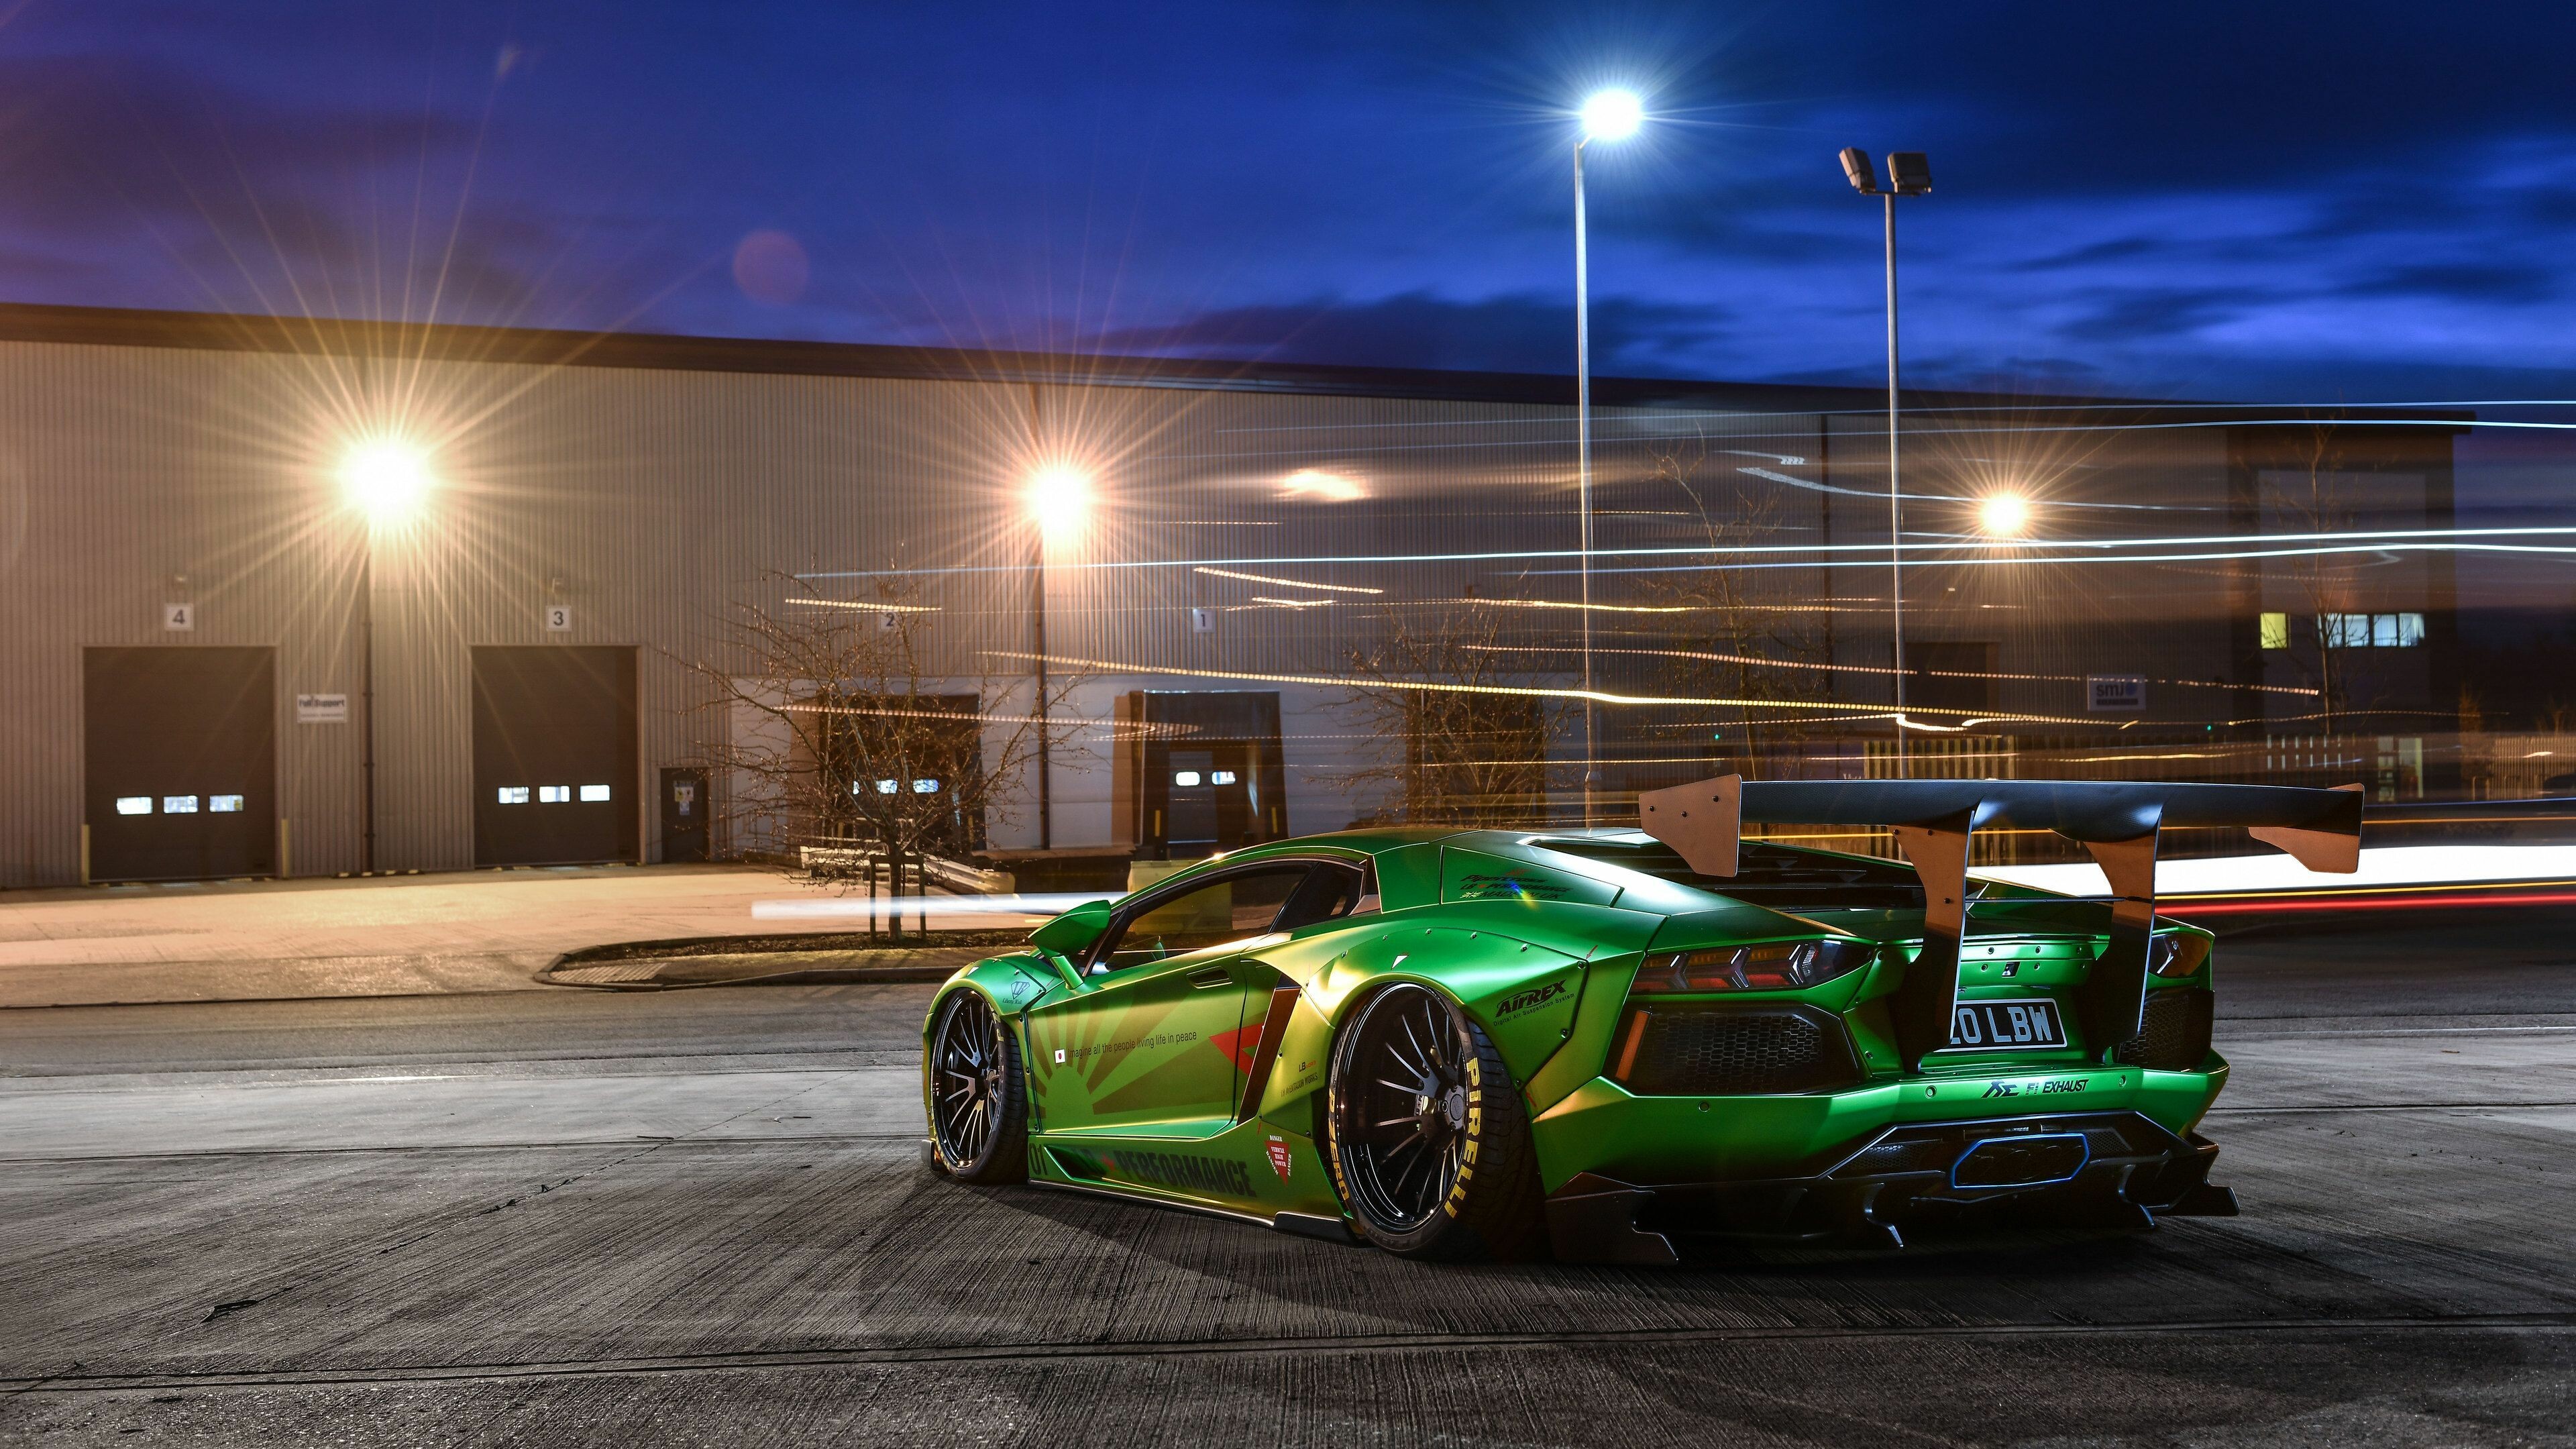 Lamborghini: Aventador, The company was officially incorporated on 30 October 1963. 3840x2160 4K Background.